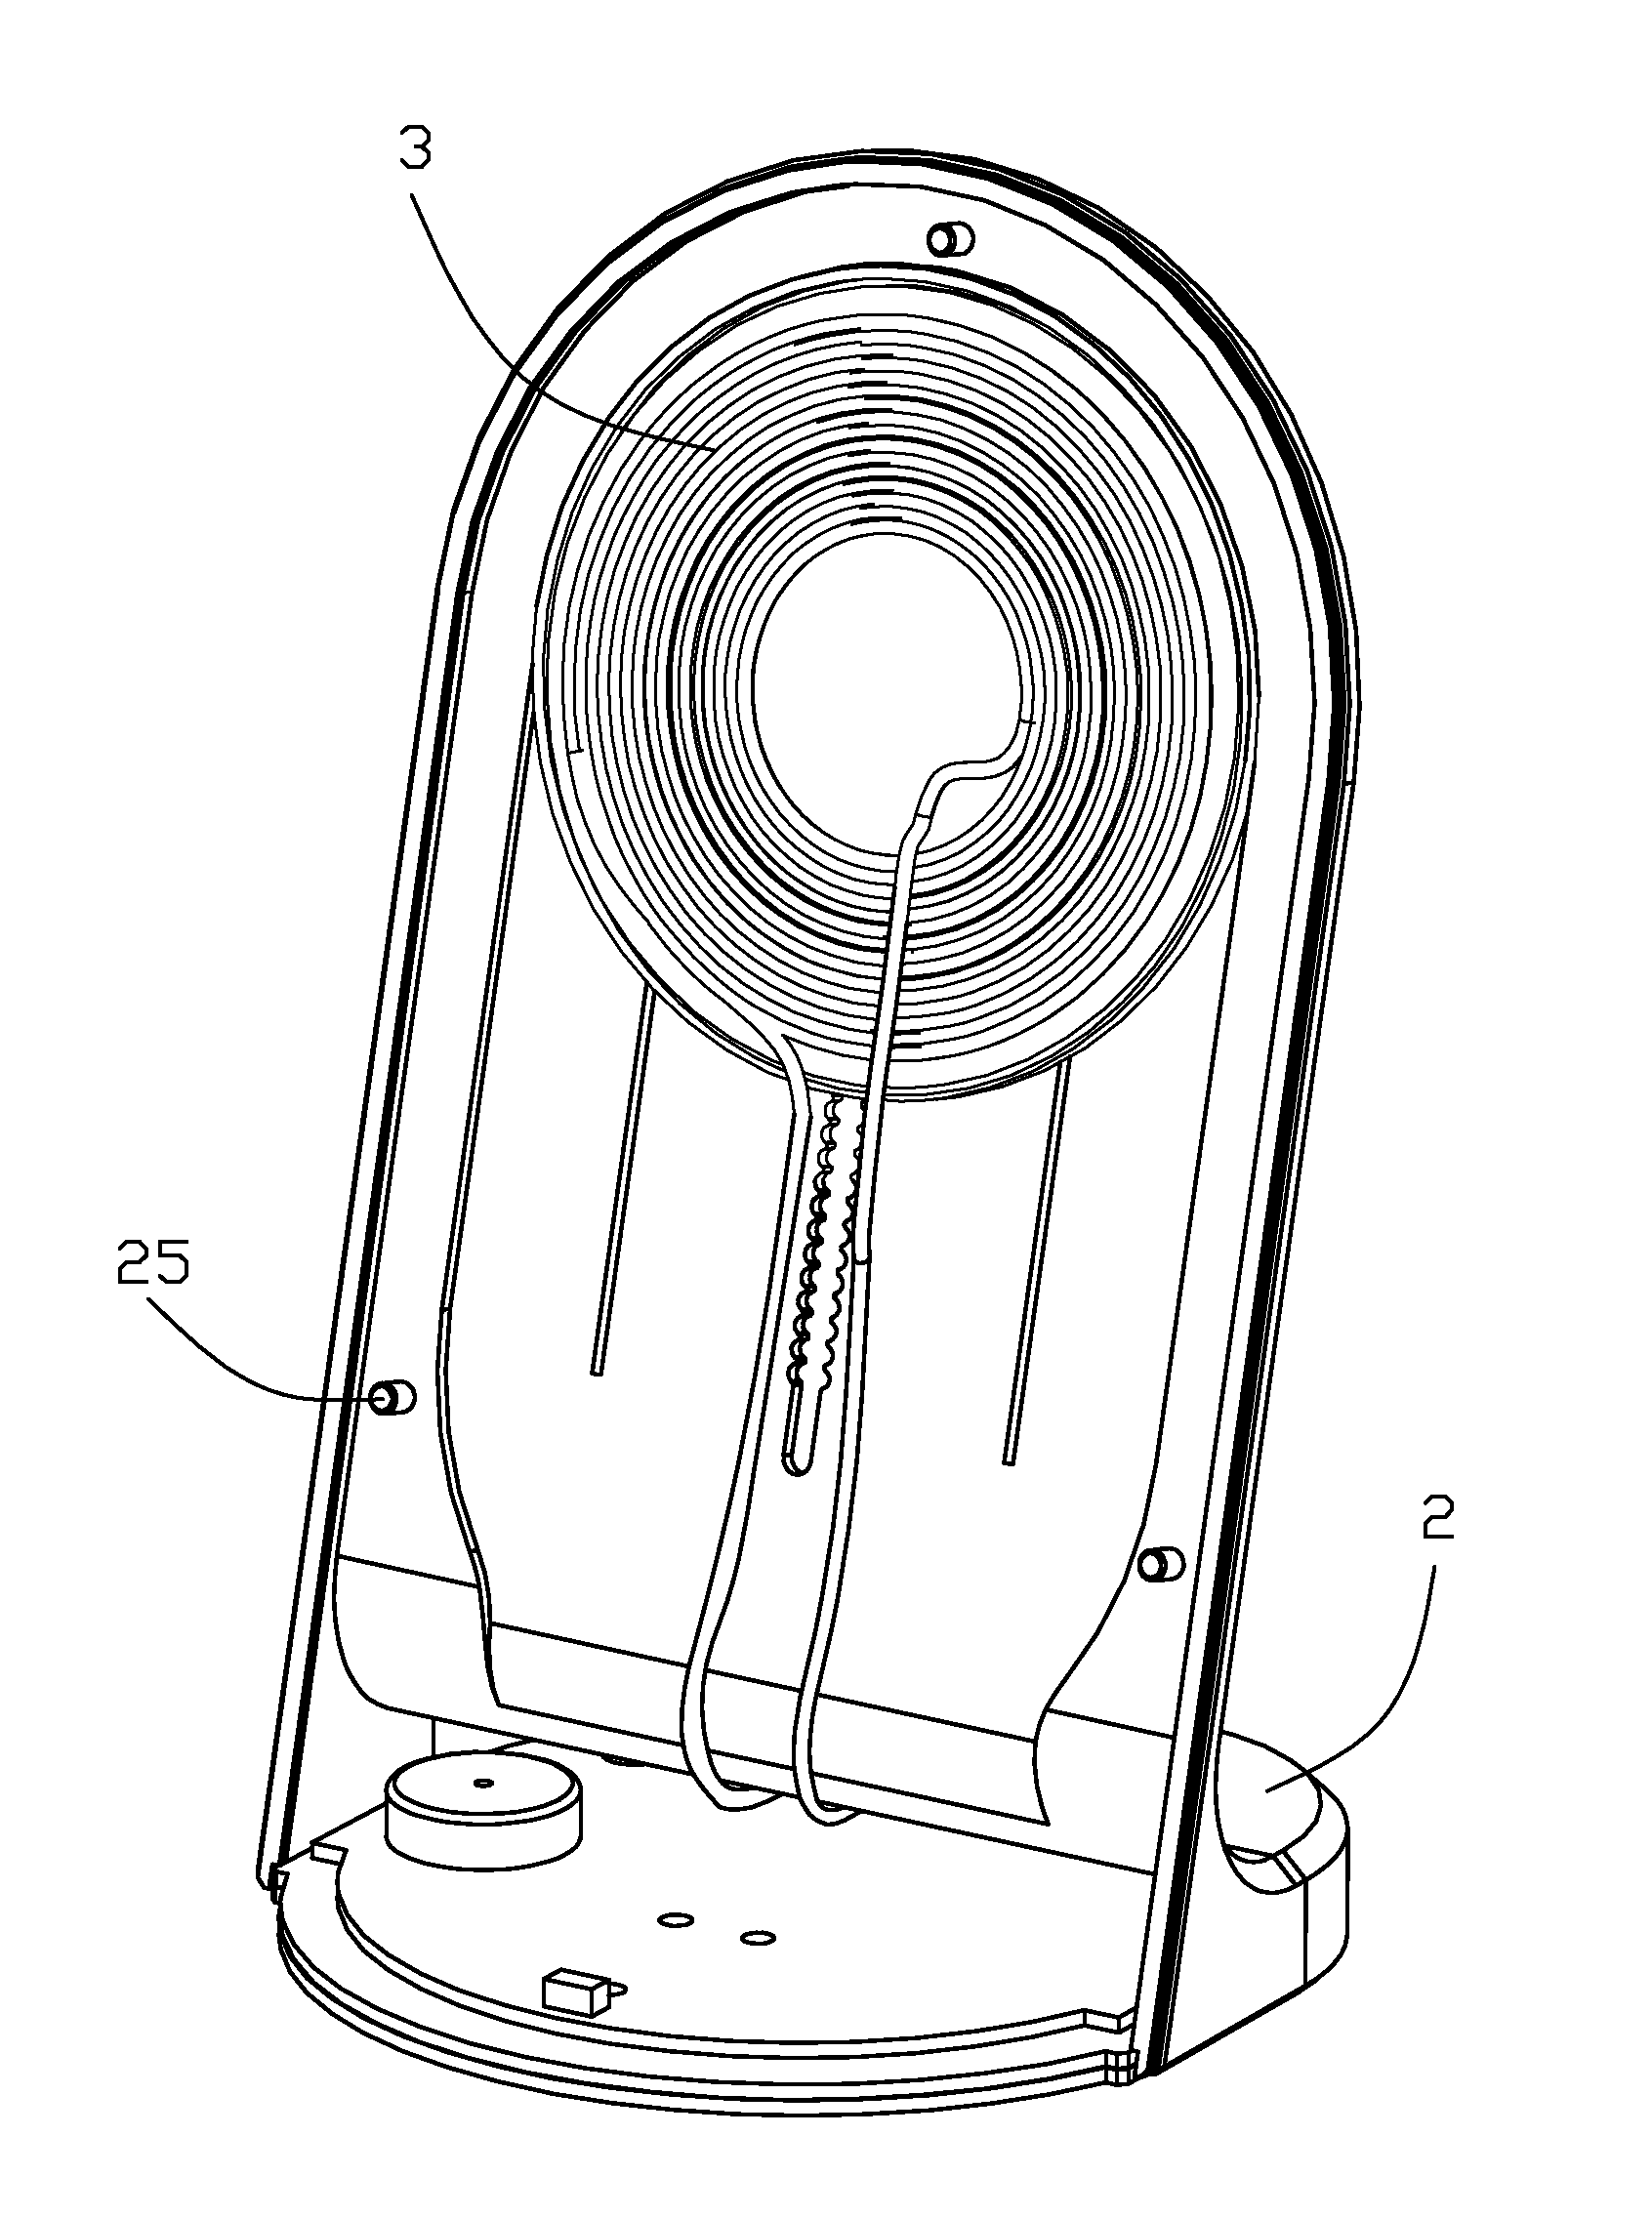 Wireless charger having moveable transimitter coil